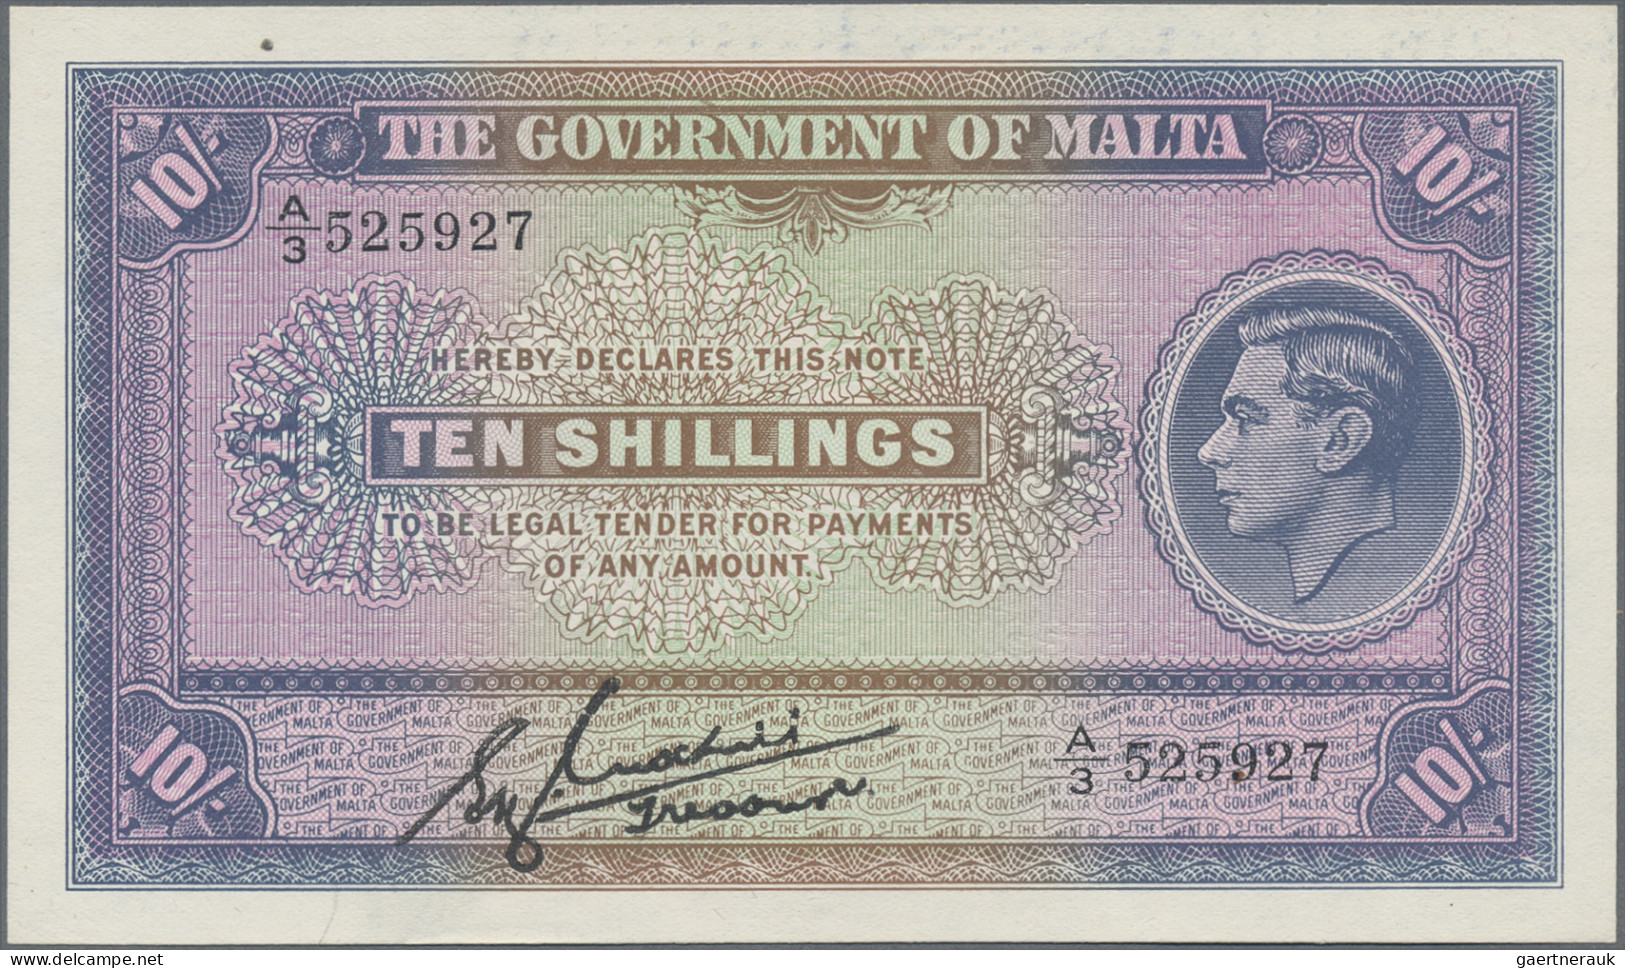 Malta: The Government of Malta, lot with 6 banknotes, 1940-1943 series, with 1 S